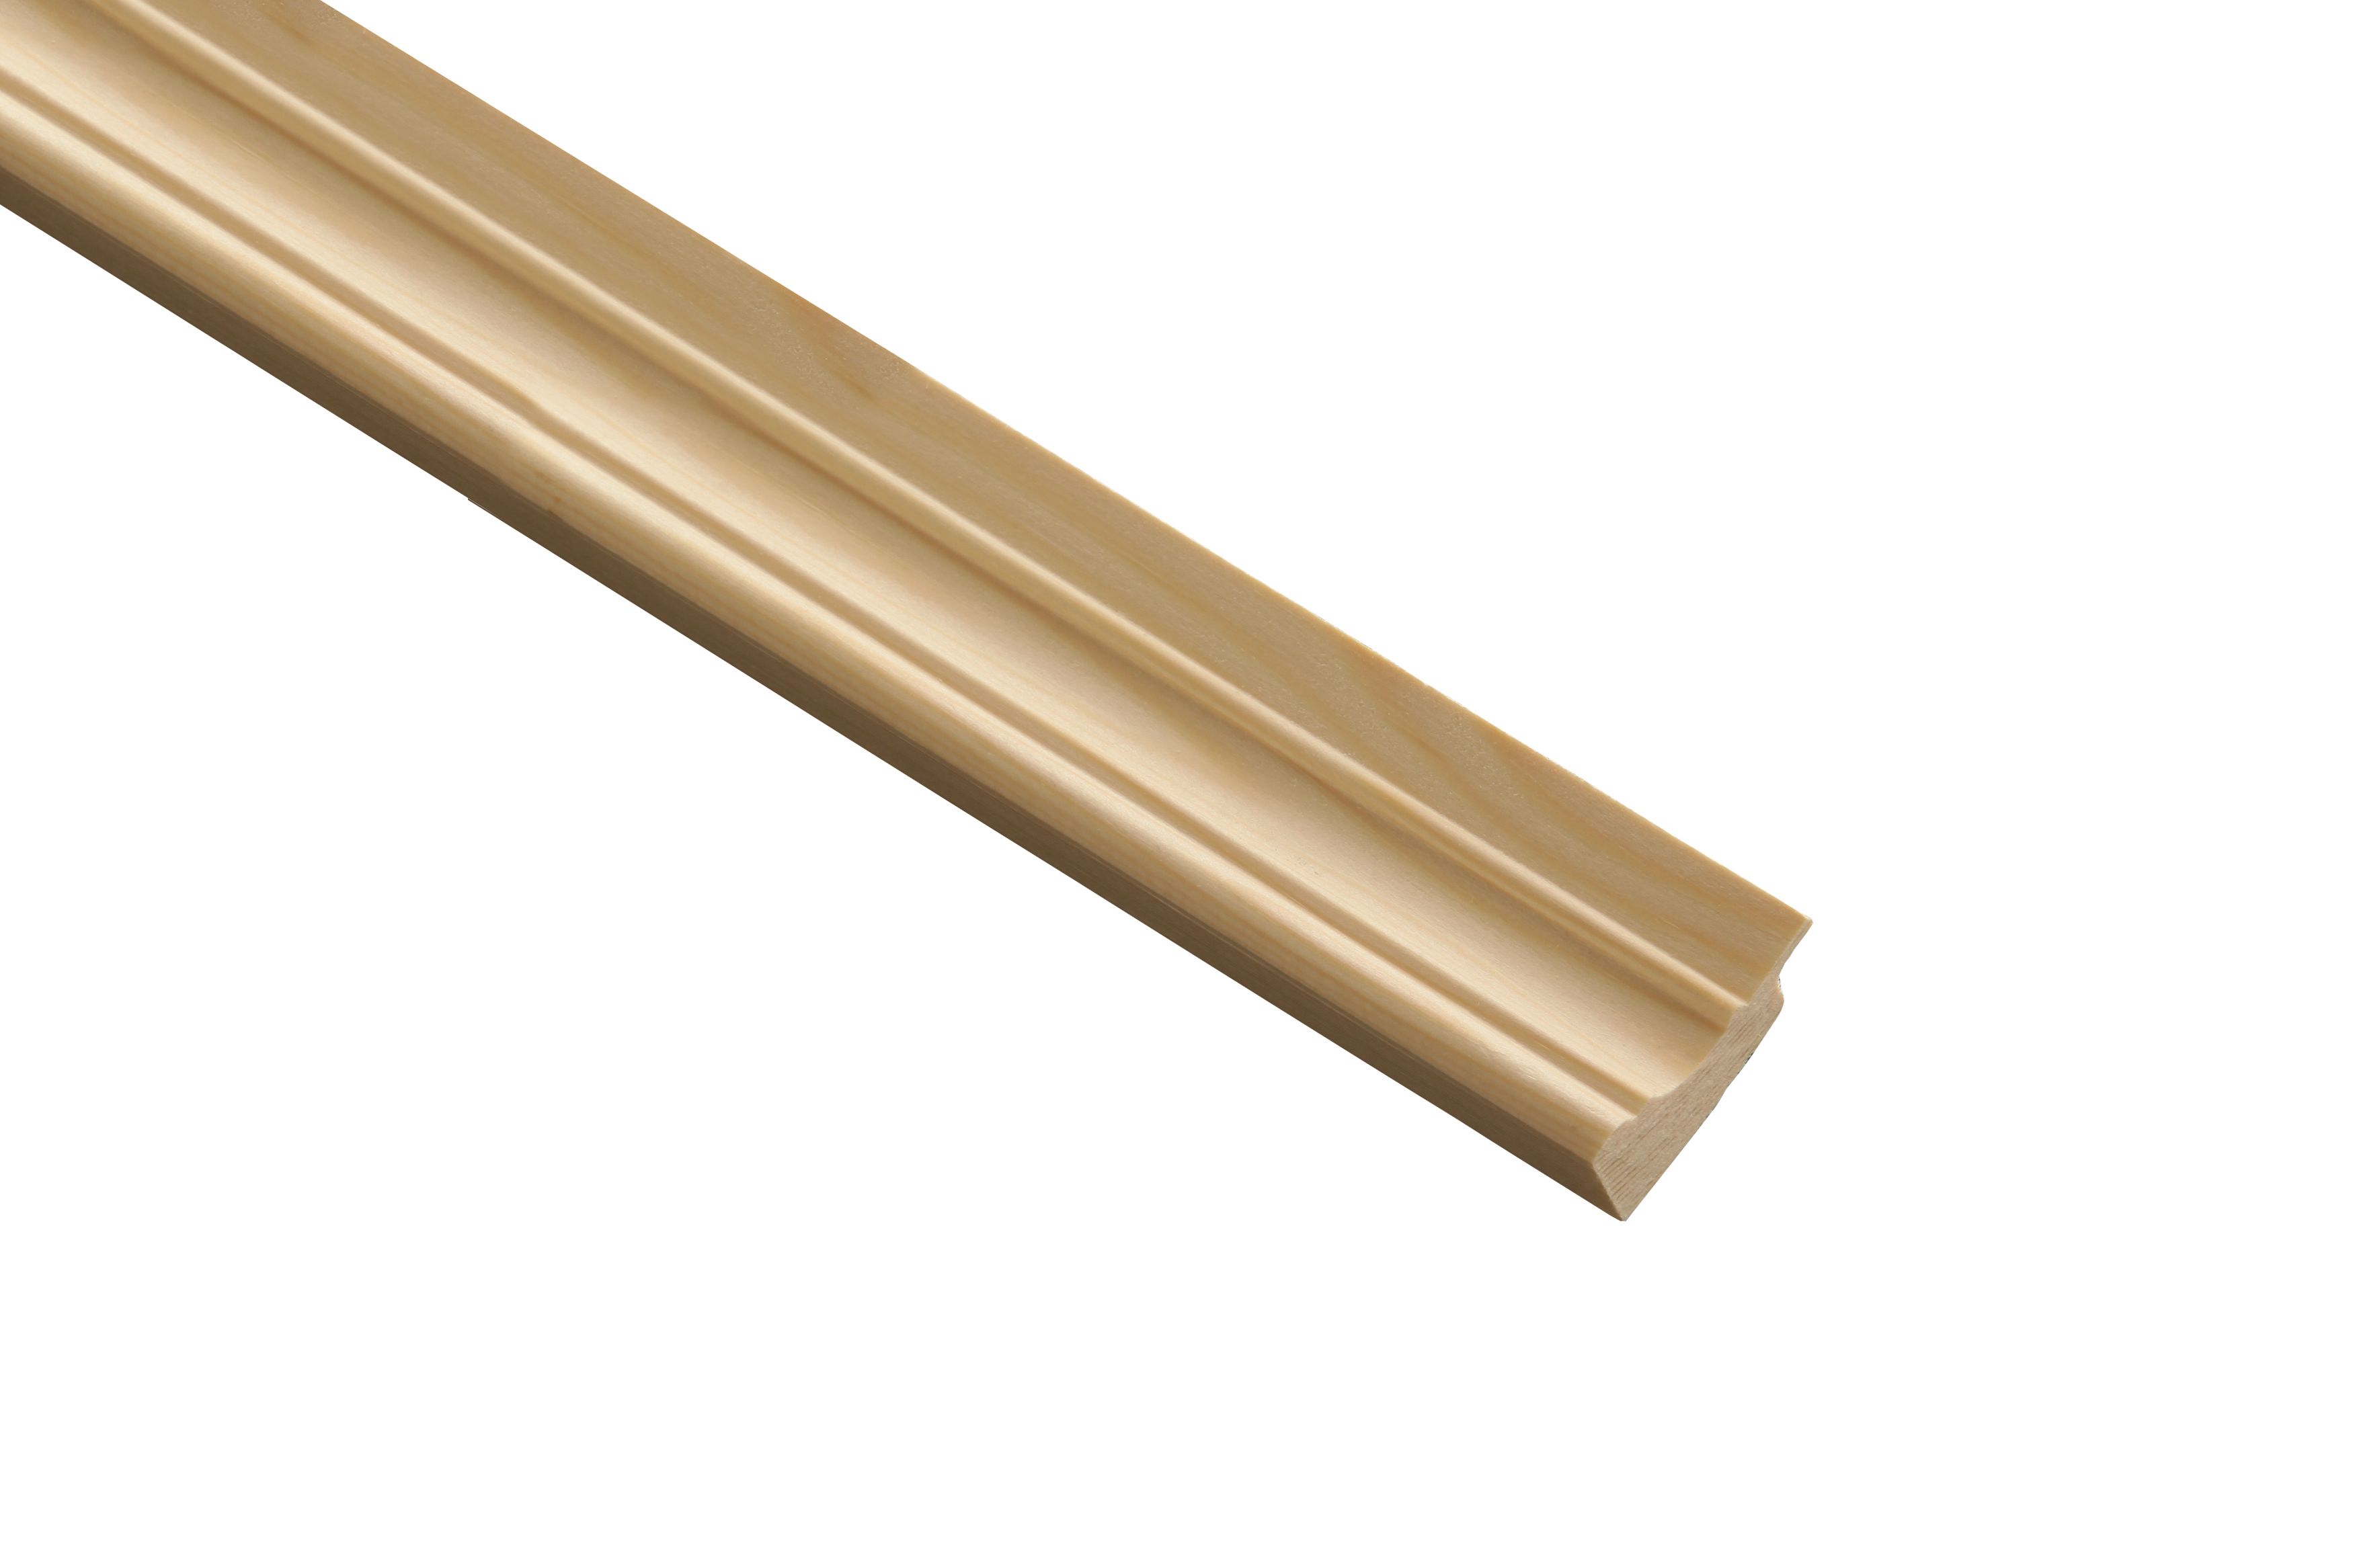 Wickes Pine Picture Moulding - 21mm x 34mm x 2.4m | Wickes.co.uk